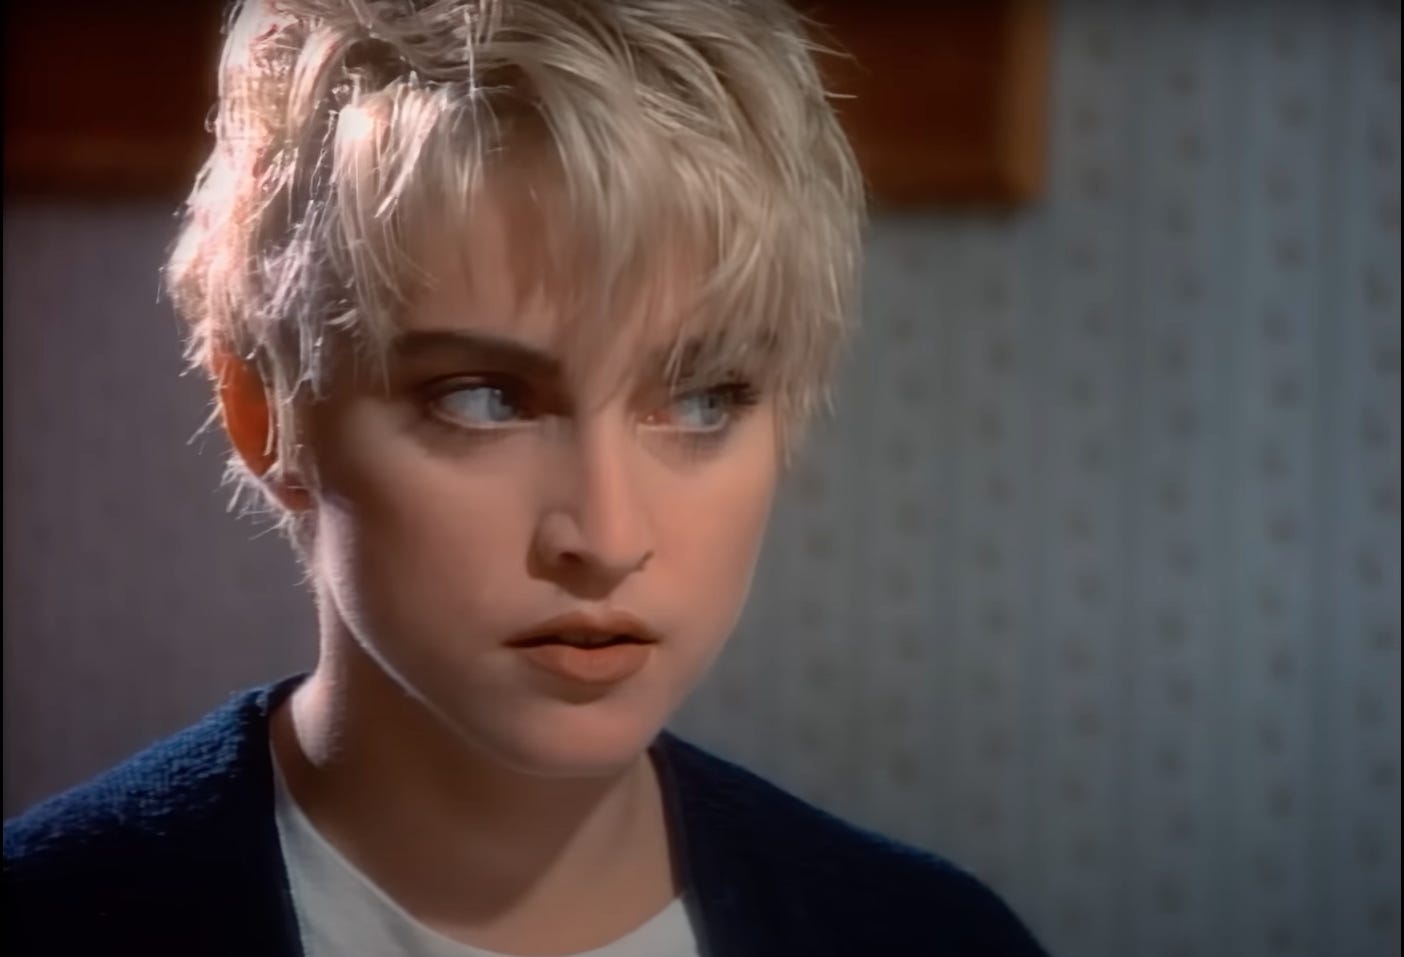 Madonna in the Papa Don't Preach video with a blond crop wearing a cardigan of all things